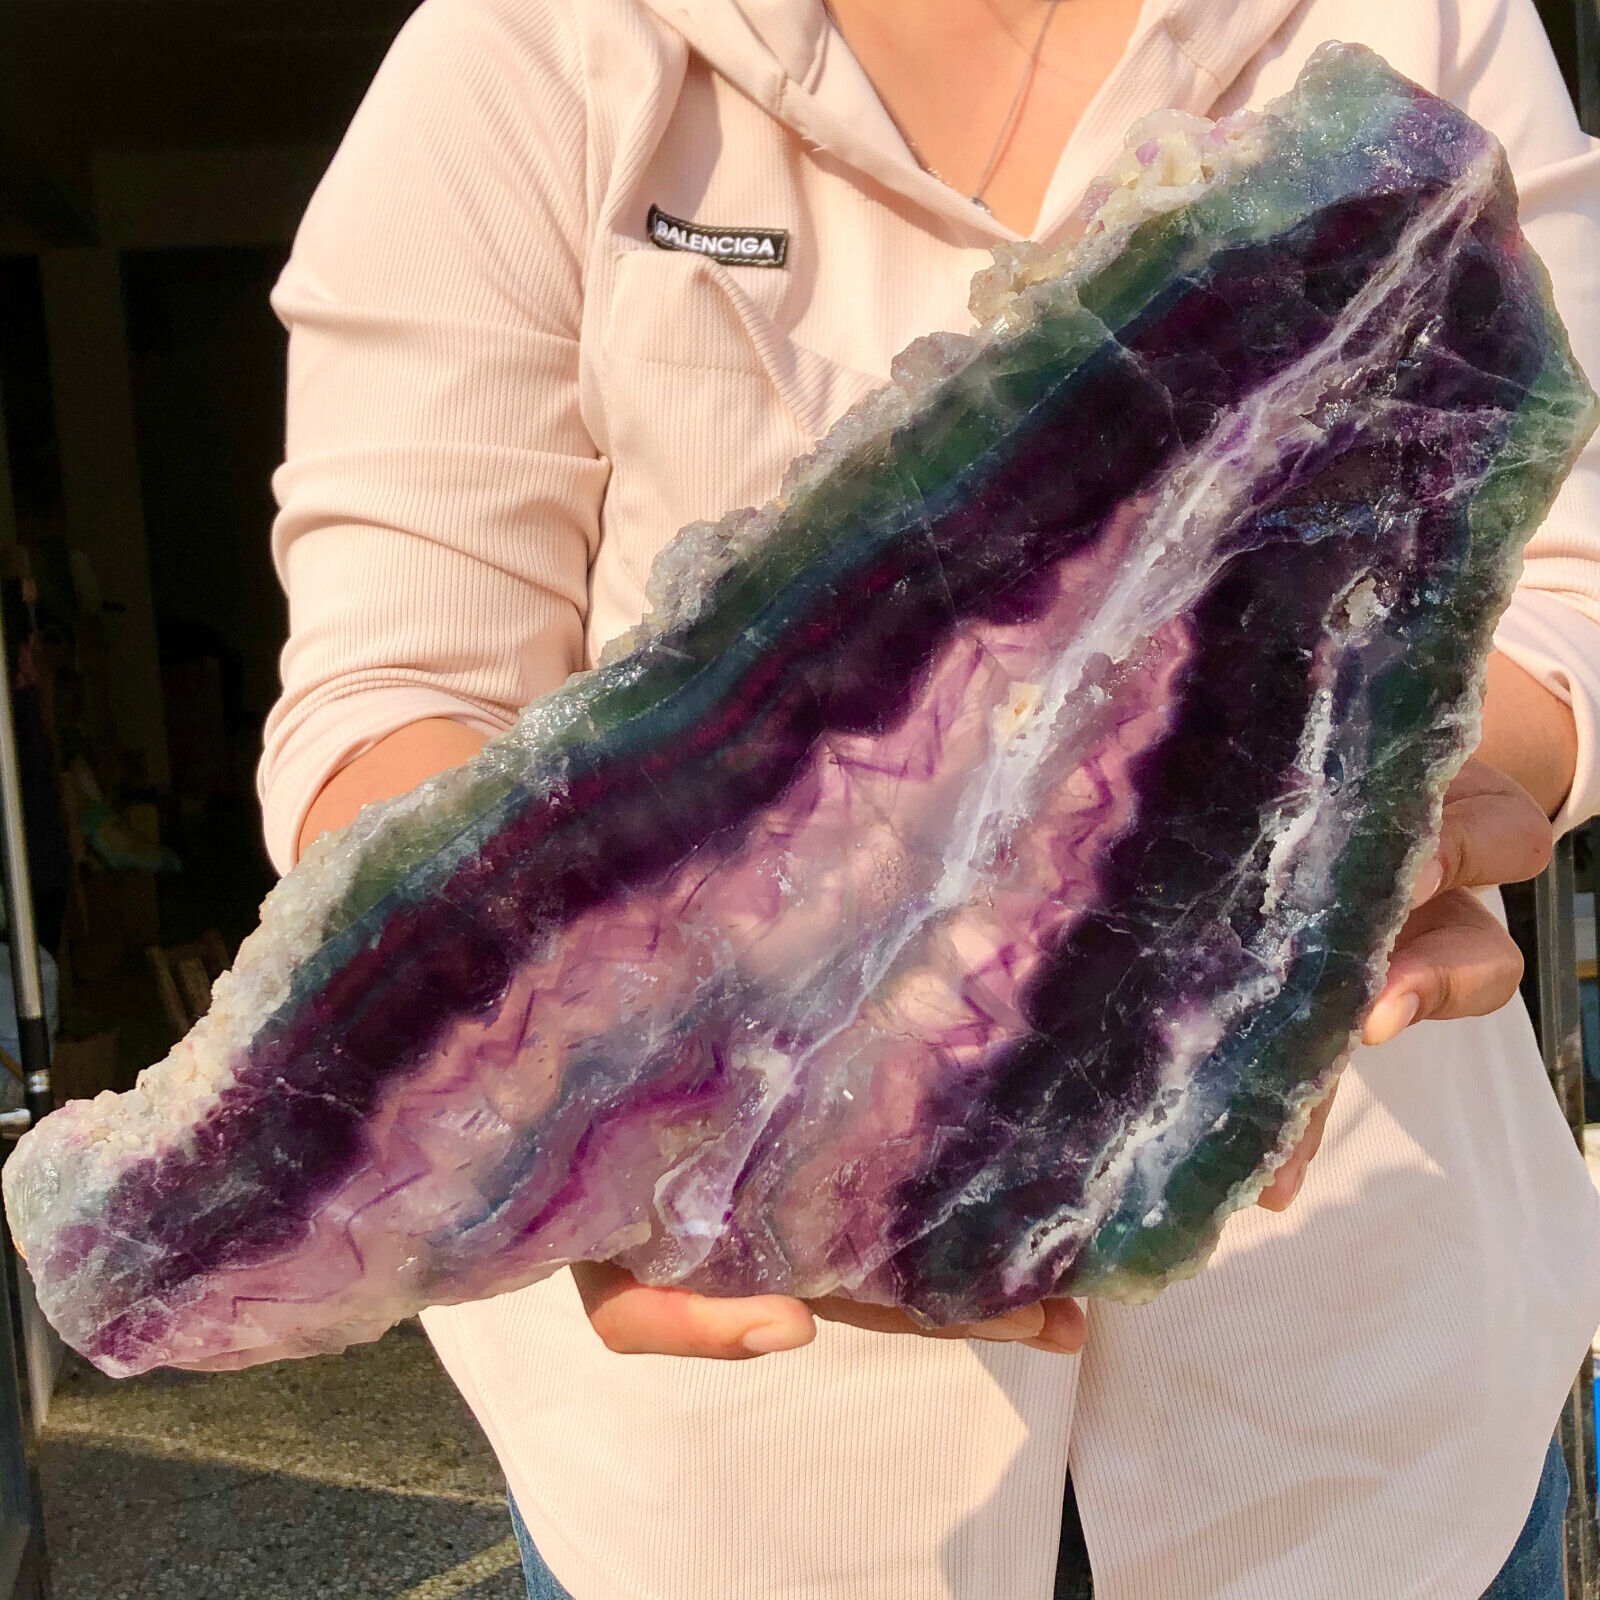 10.48lb  Natural beautiful Rainbow Fluorite Crystal Rough stone specimens cure